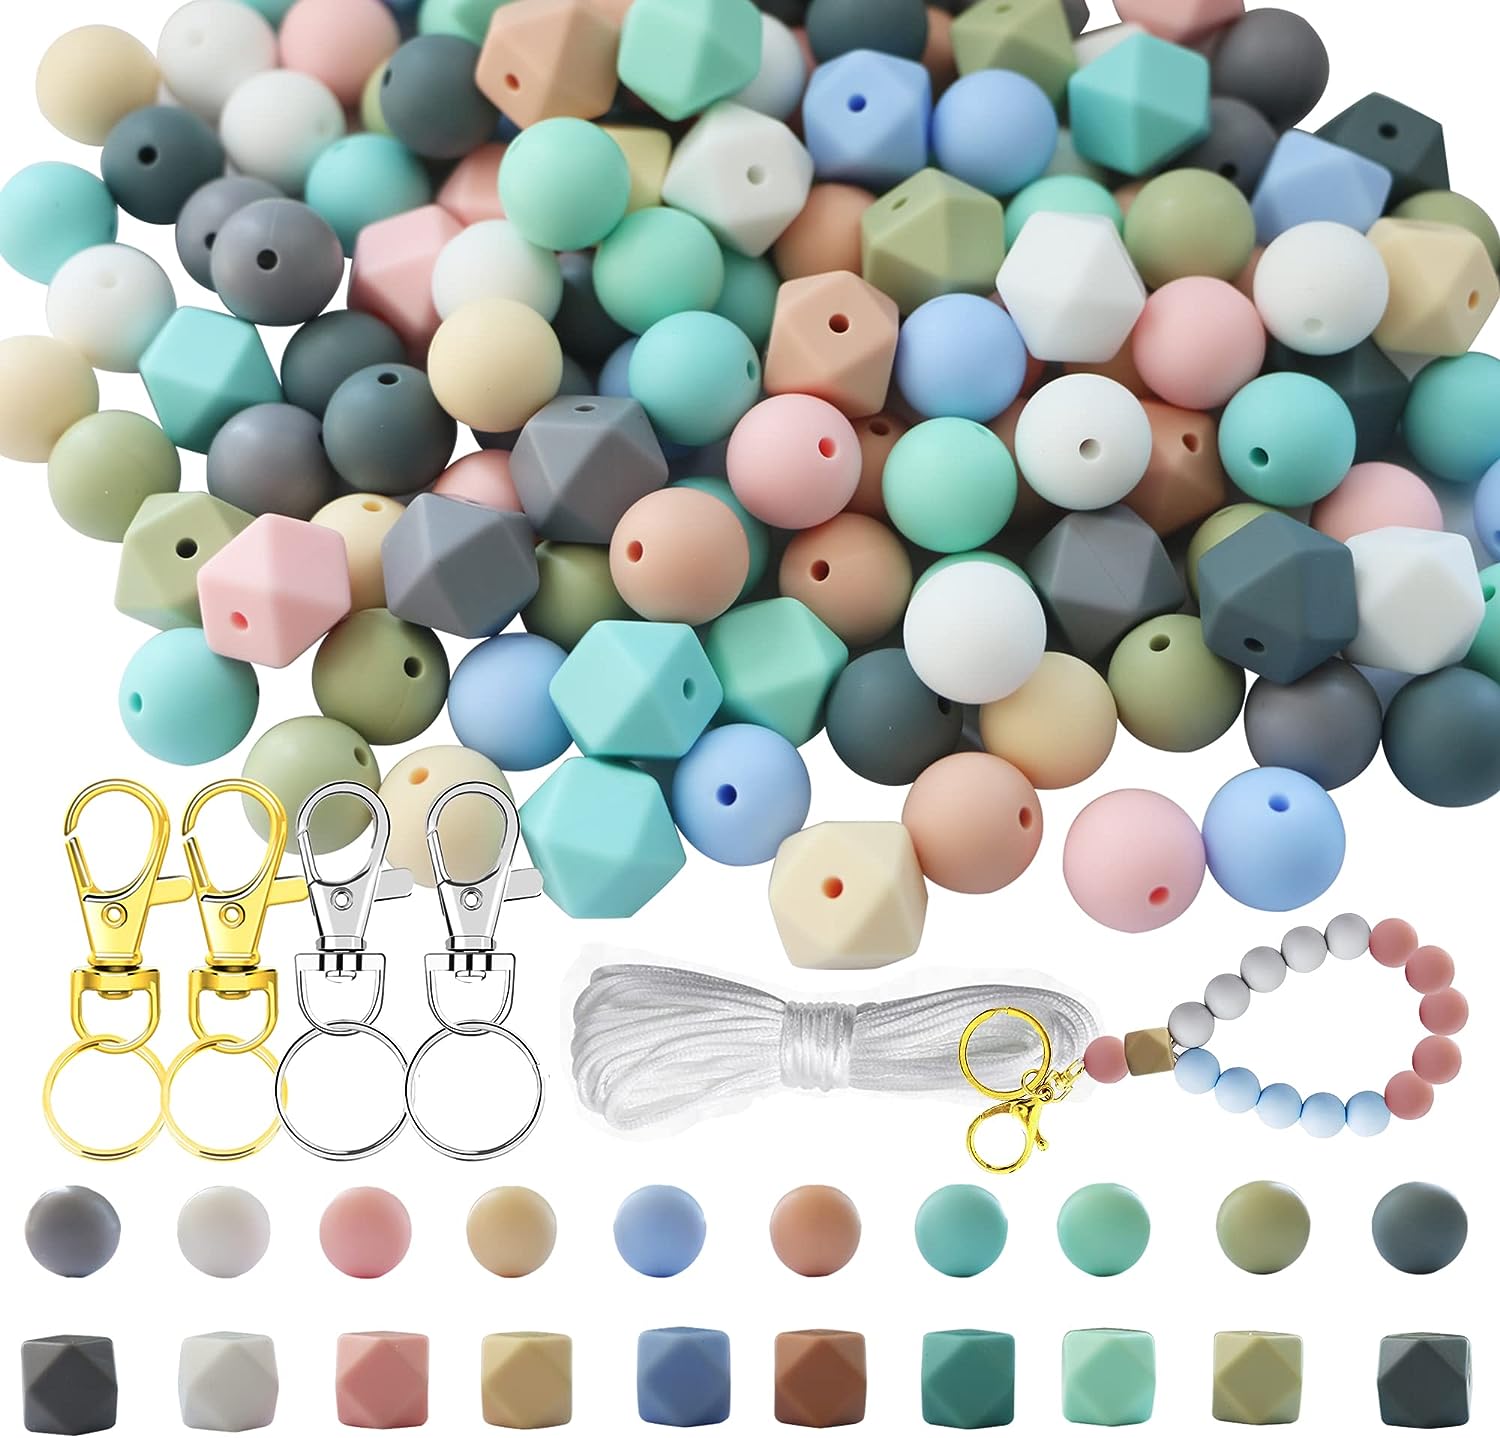  102 Pcs Silicone Beads for Keychain Making, DIY